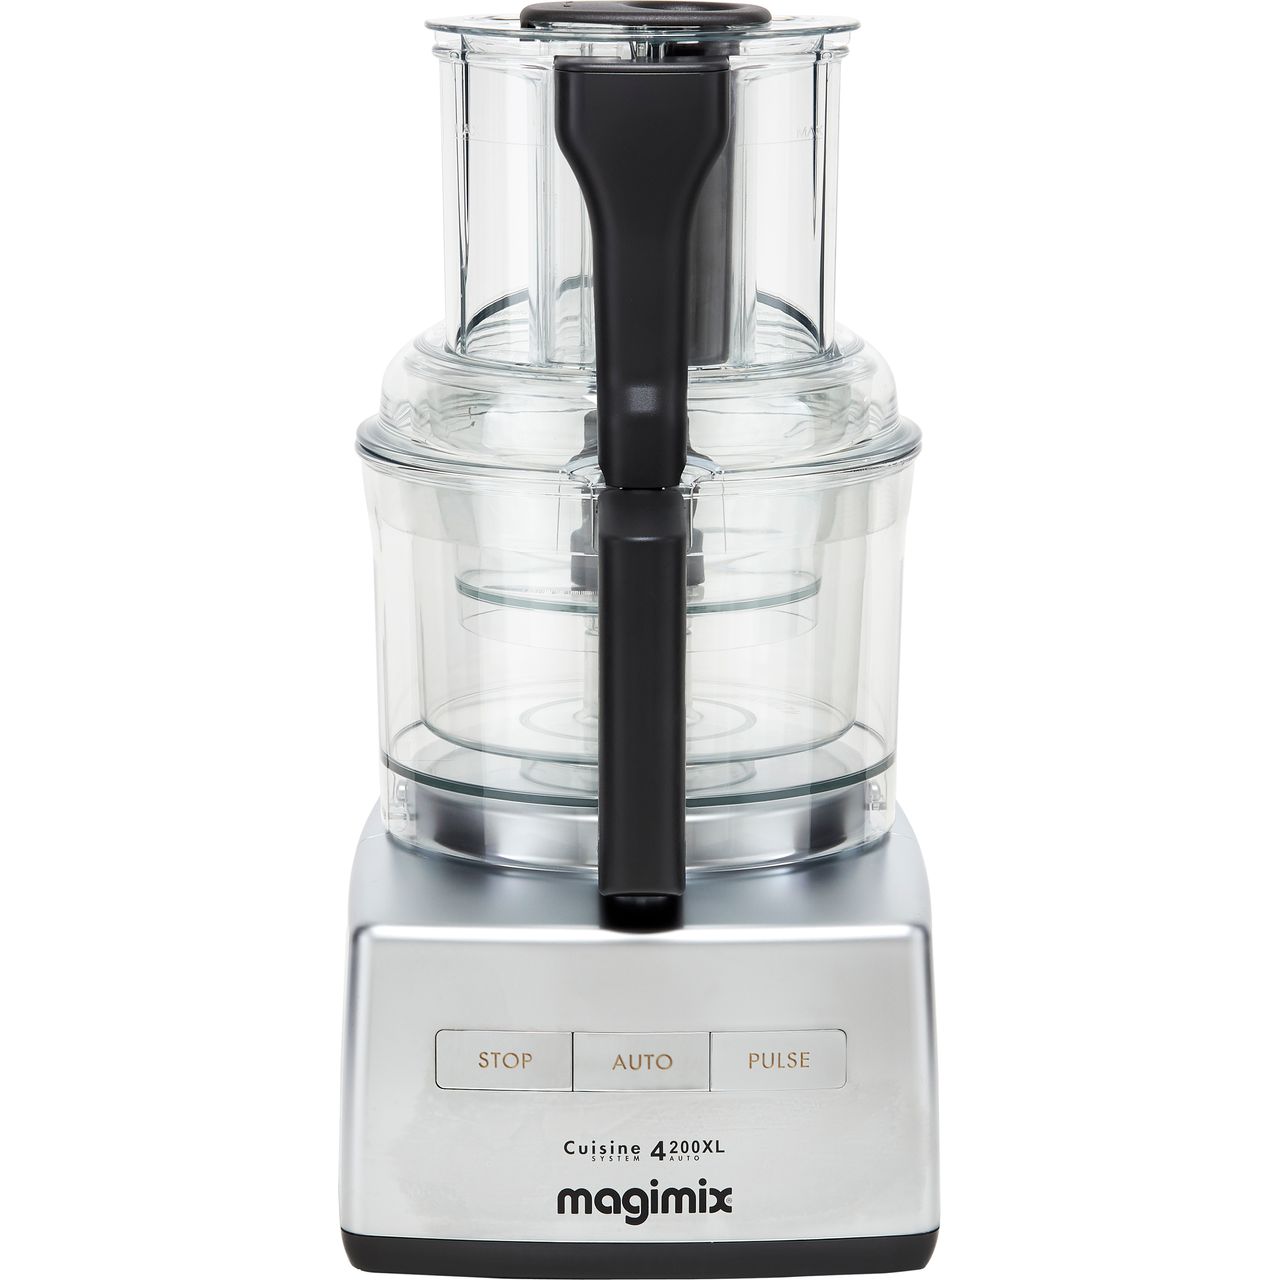 extreem helemaal Assimilatie 18471 | Magimix Food Processor | Satin Stainless Steel | ao.com